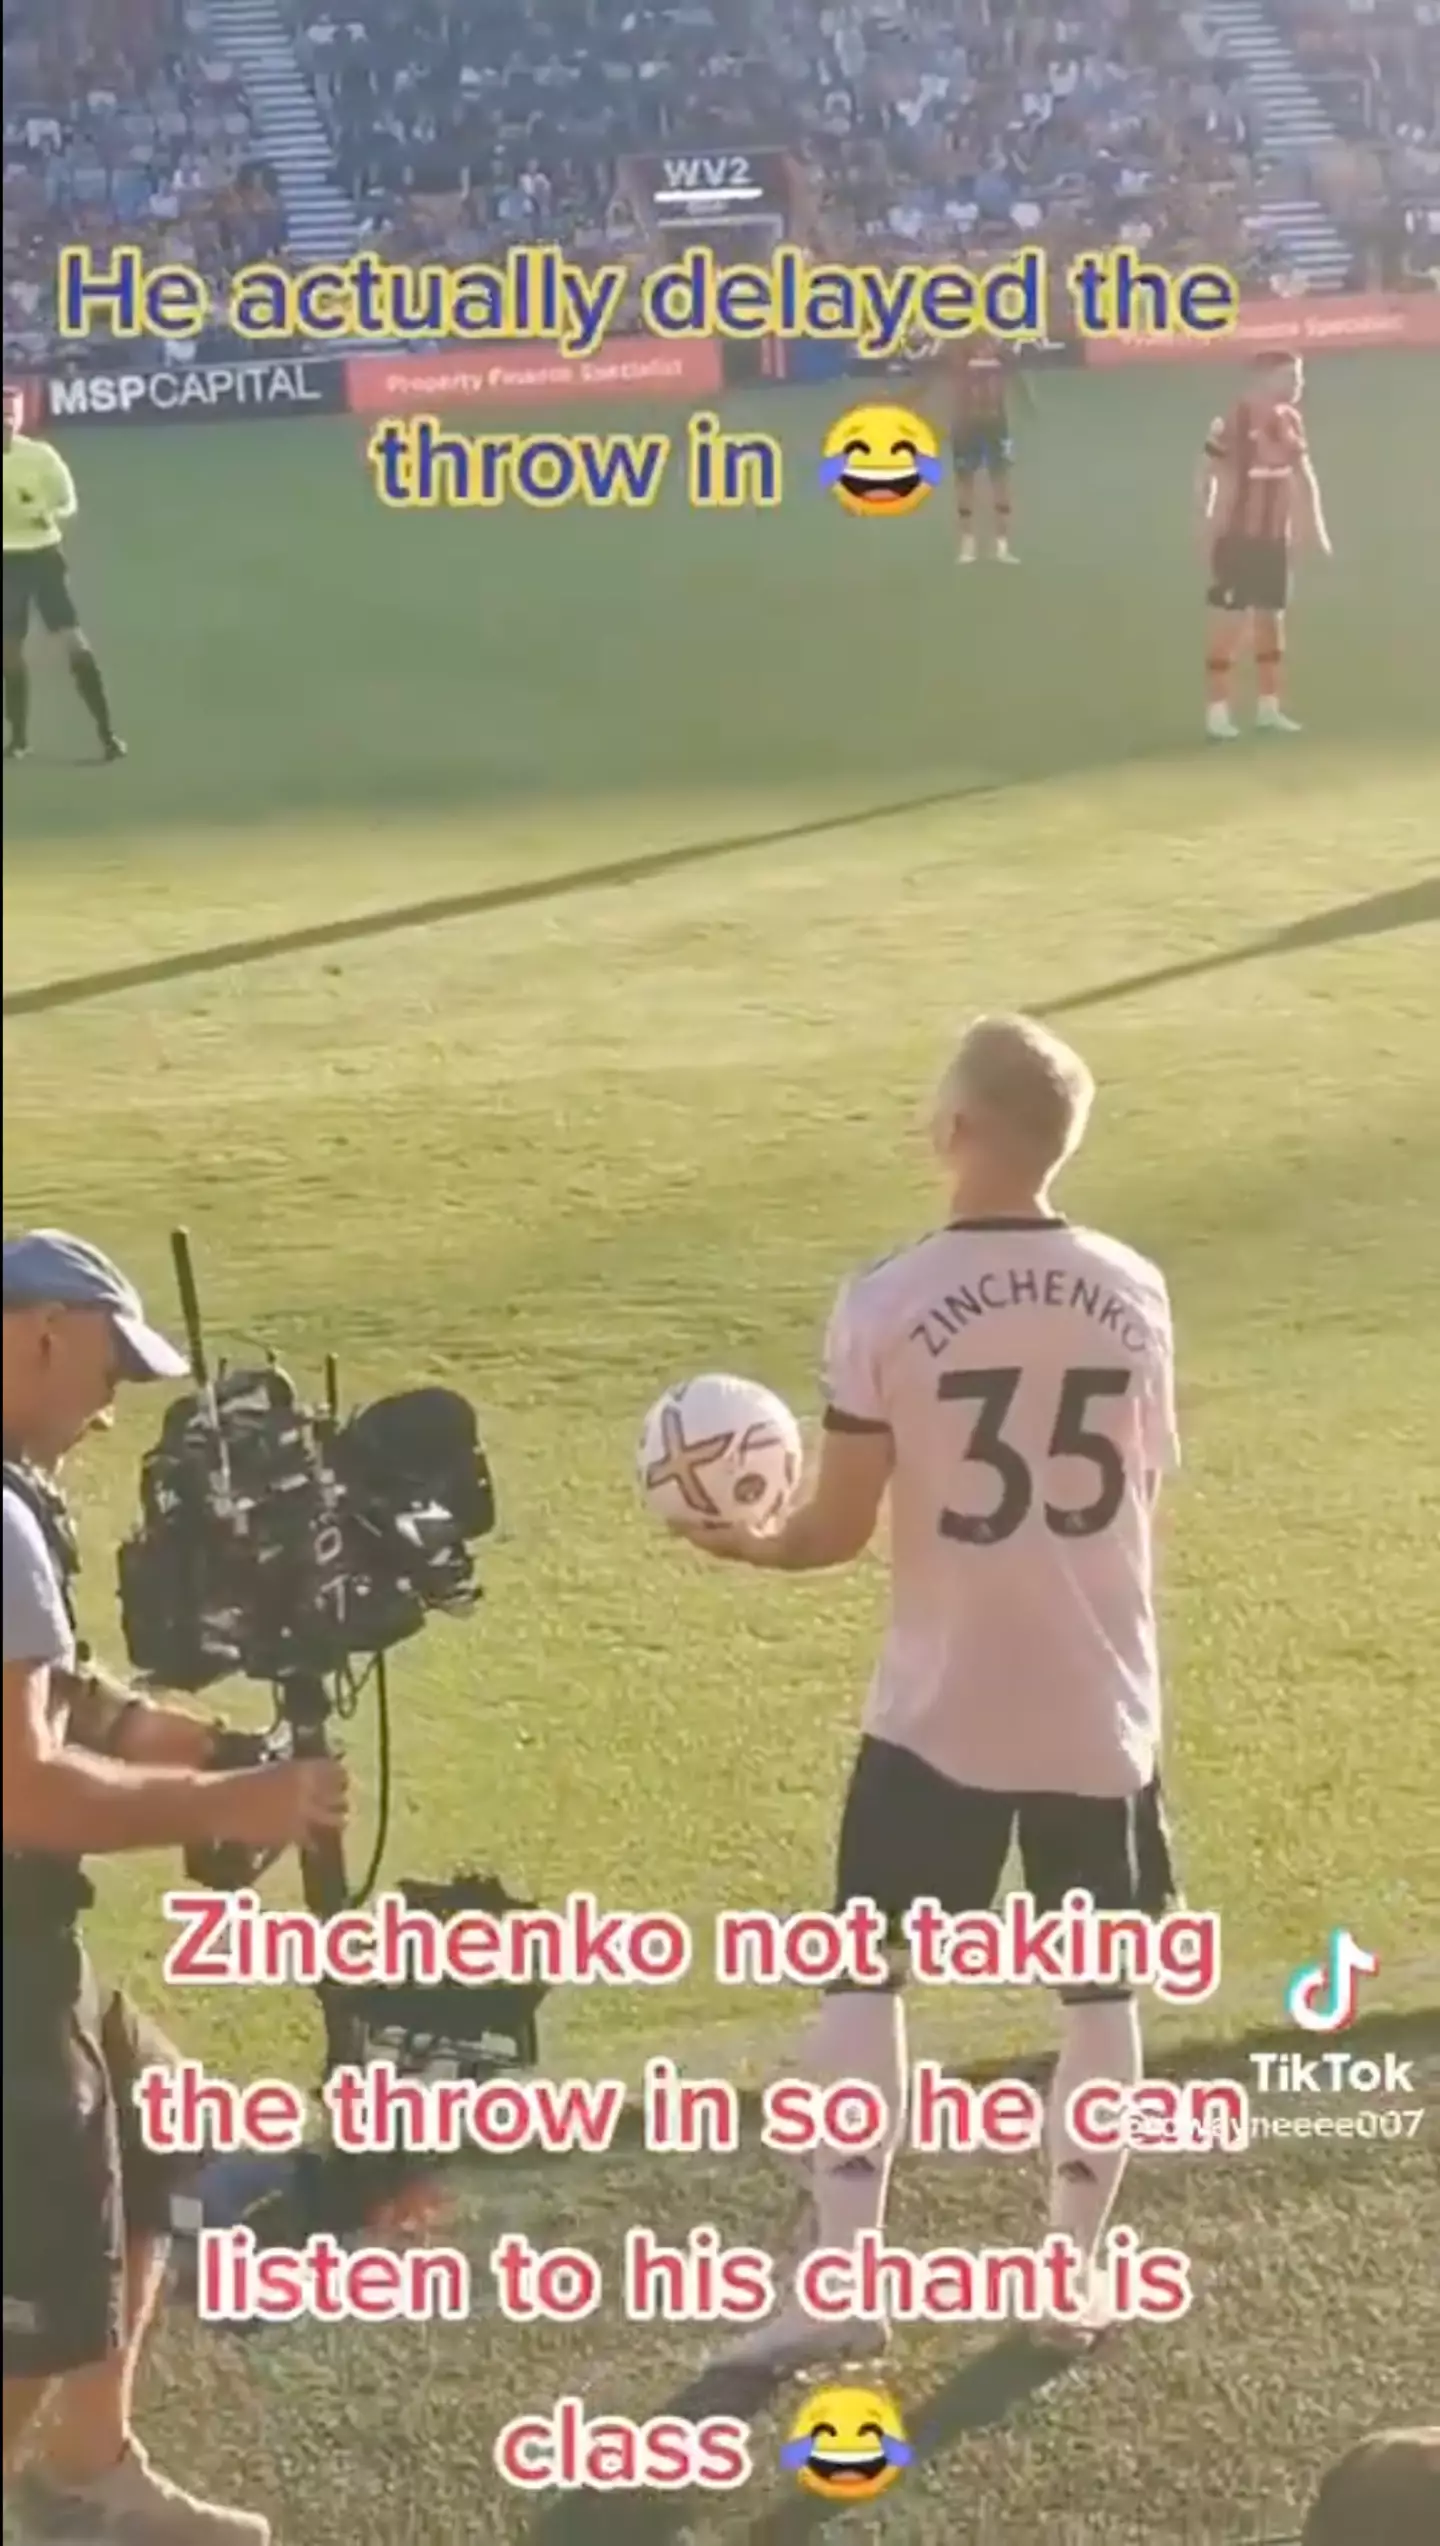 It took Zinchenko around 20 seconds to take the throw-in. (Image